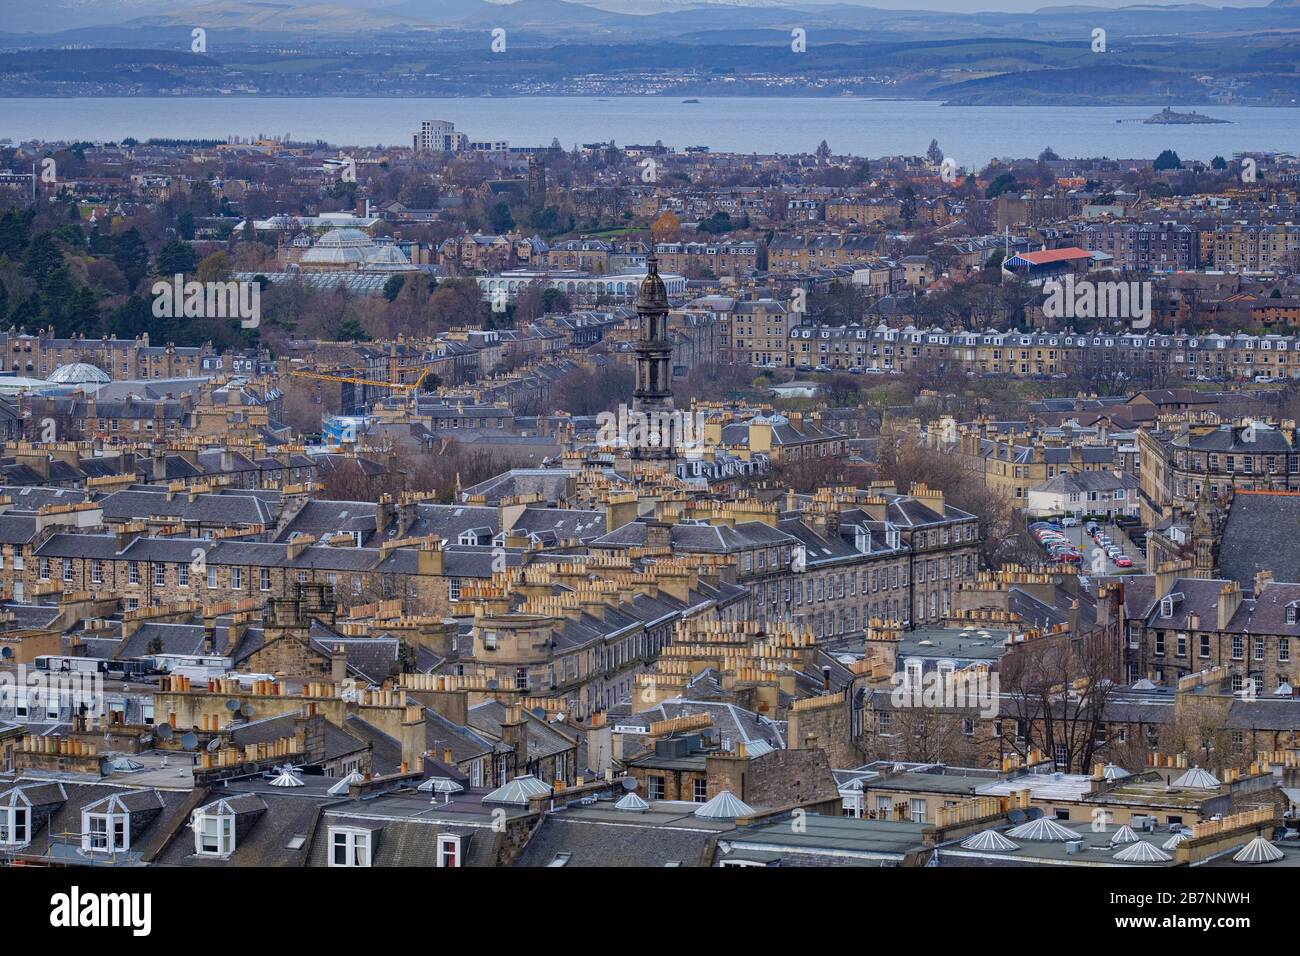 Edinburgh rooftops view looking over  the city to the Firth of Forth and Fife. Stock Photo